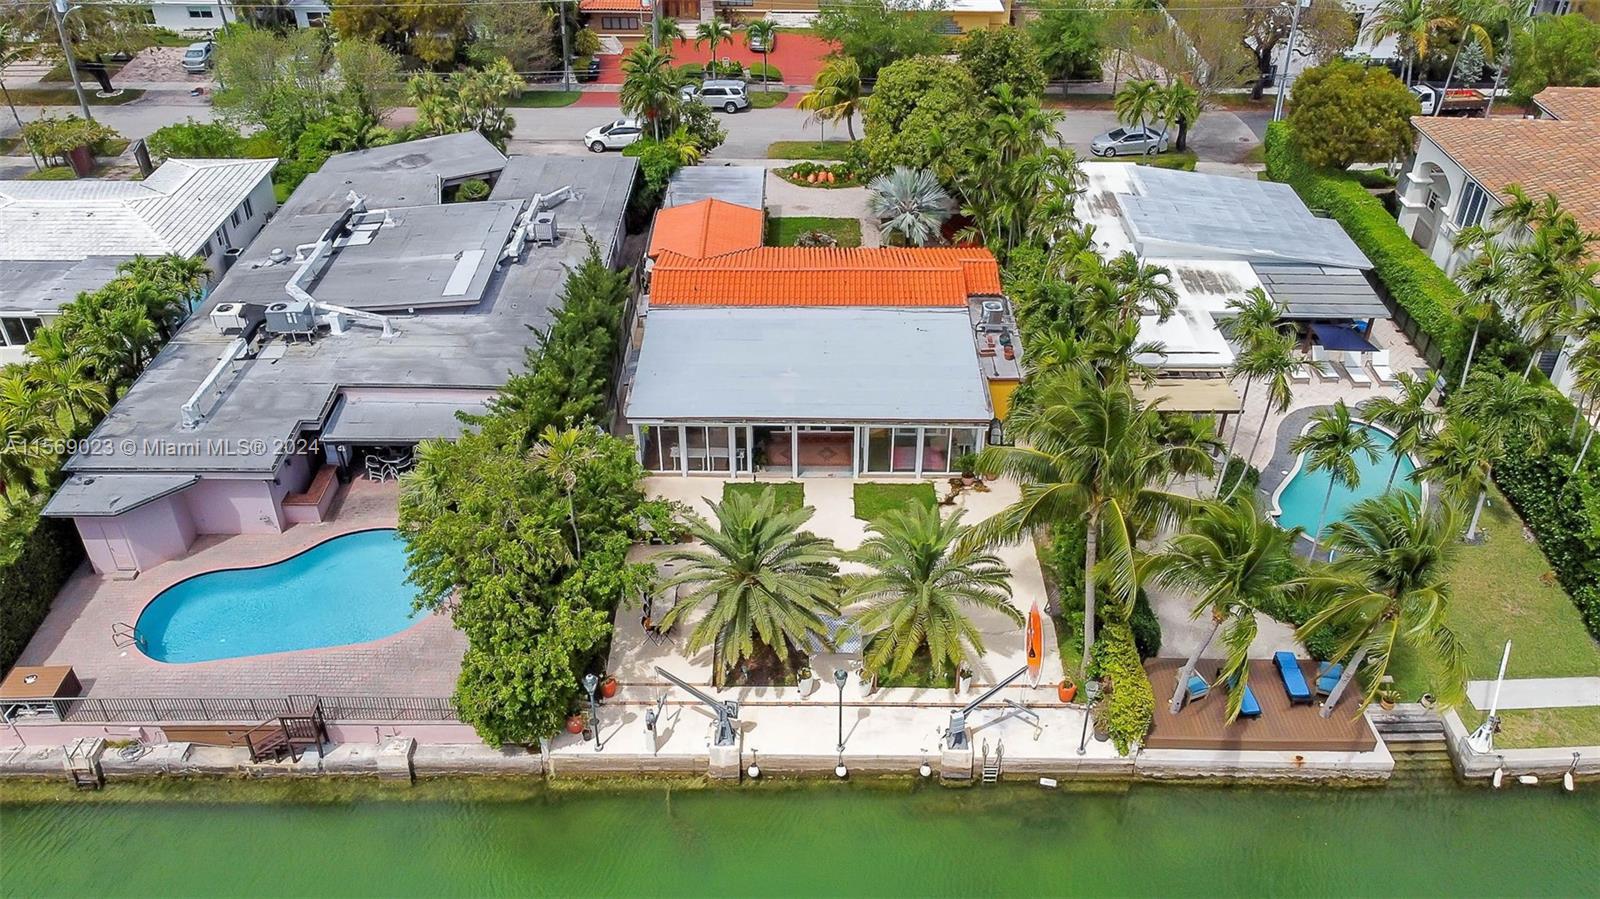 Exquisite waterfront residence in Biscayne Point. Distinctive home featuring 5 bedrooms, 4 bathrooms